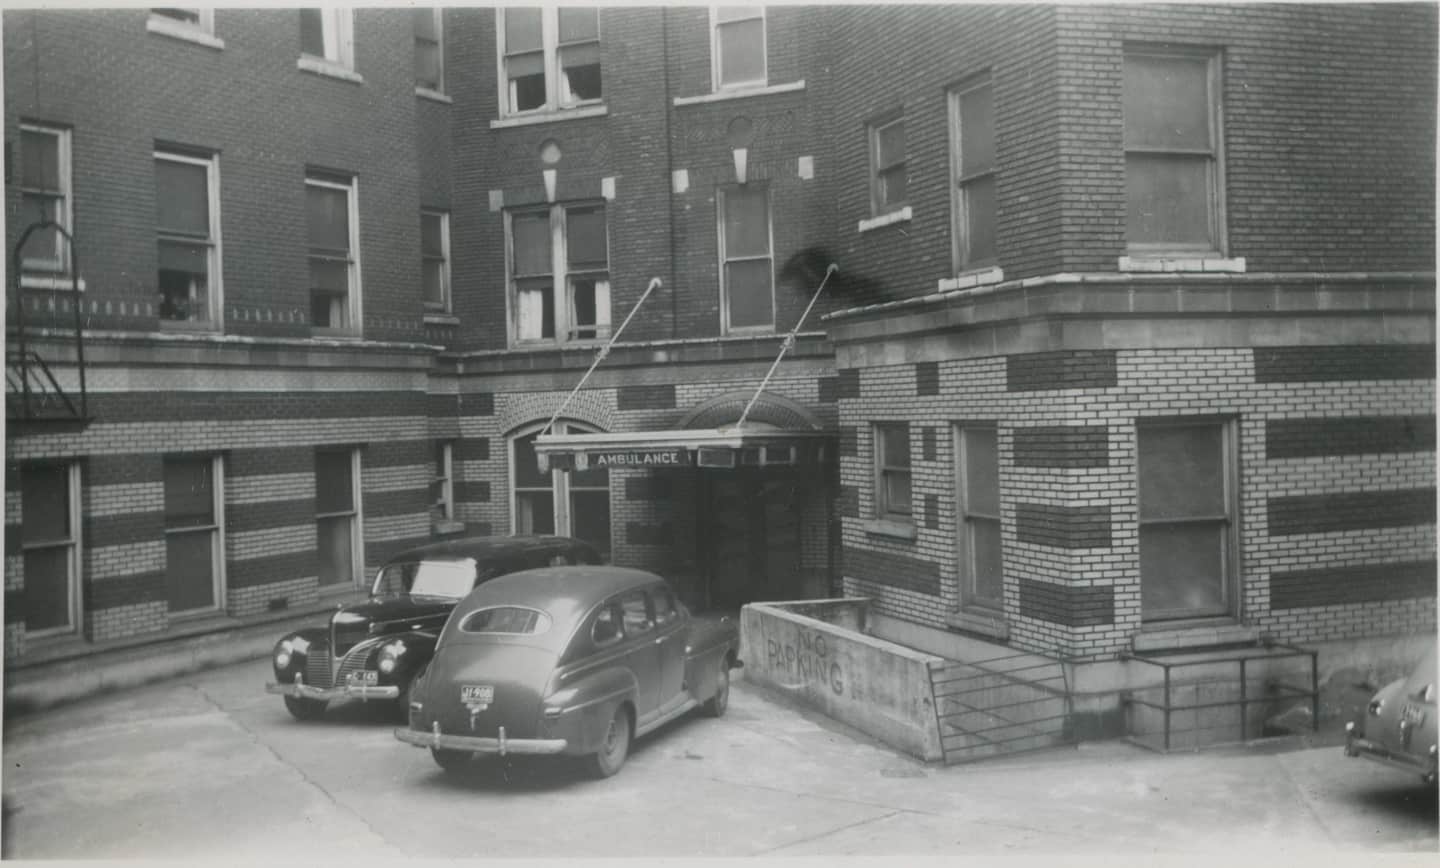 Image of St. Paul's Hospital's ambulance bay in 1948.